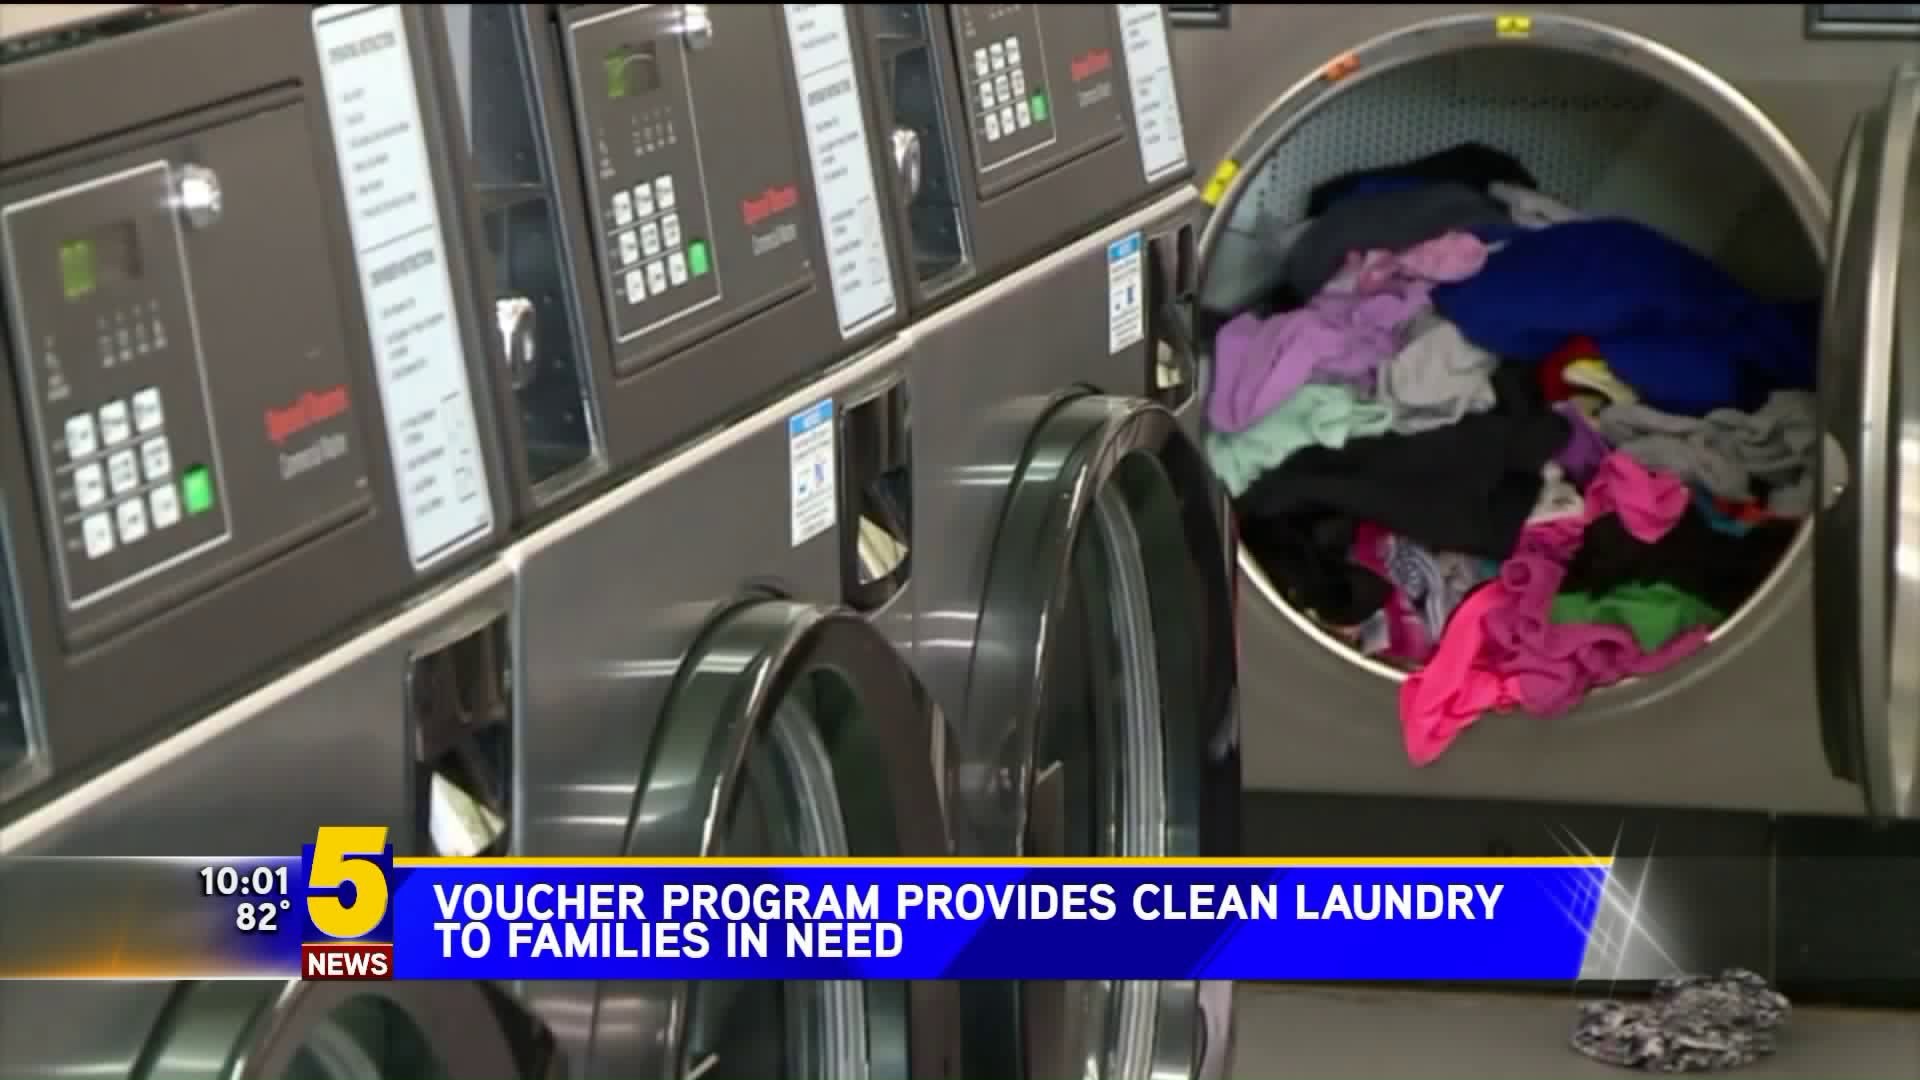 Laundry Vouchers For Families In Need